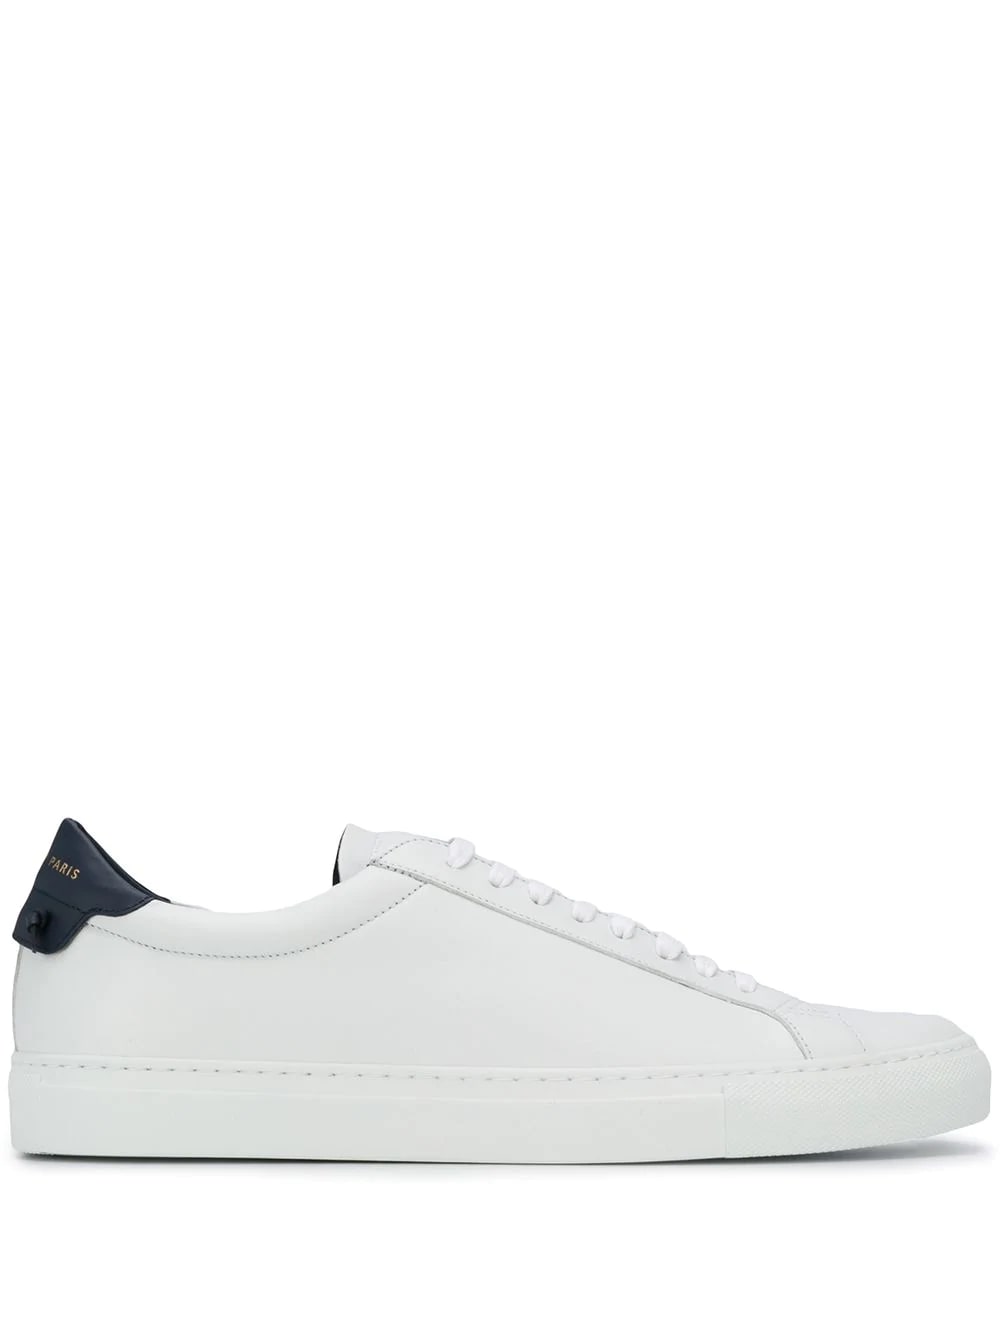 Givenchy Man White And Navy Blue Urban Street Sneakers